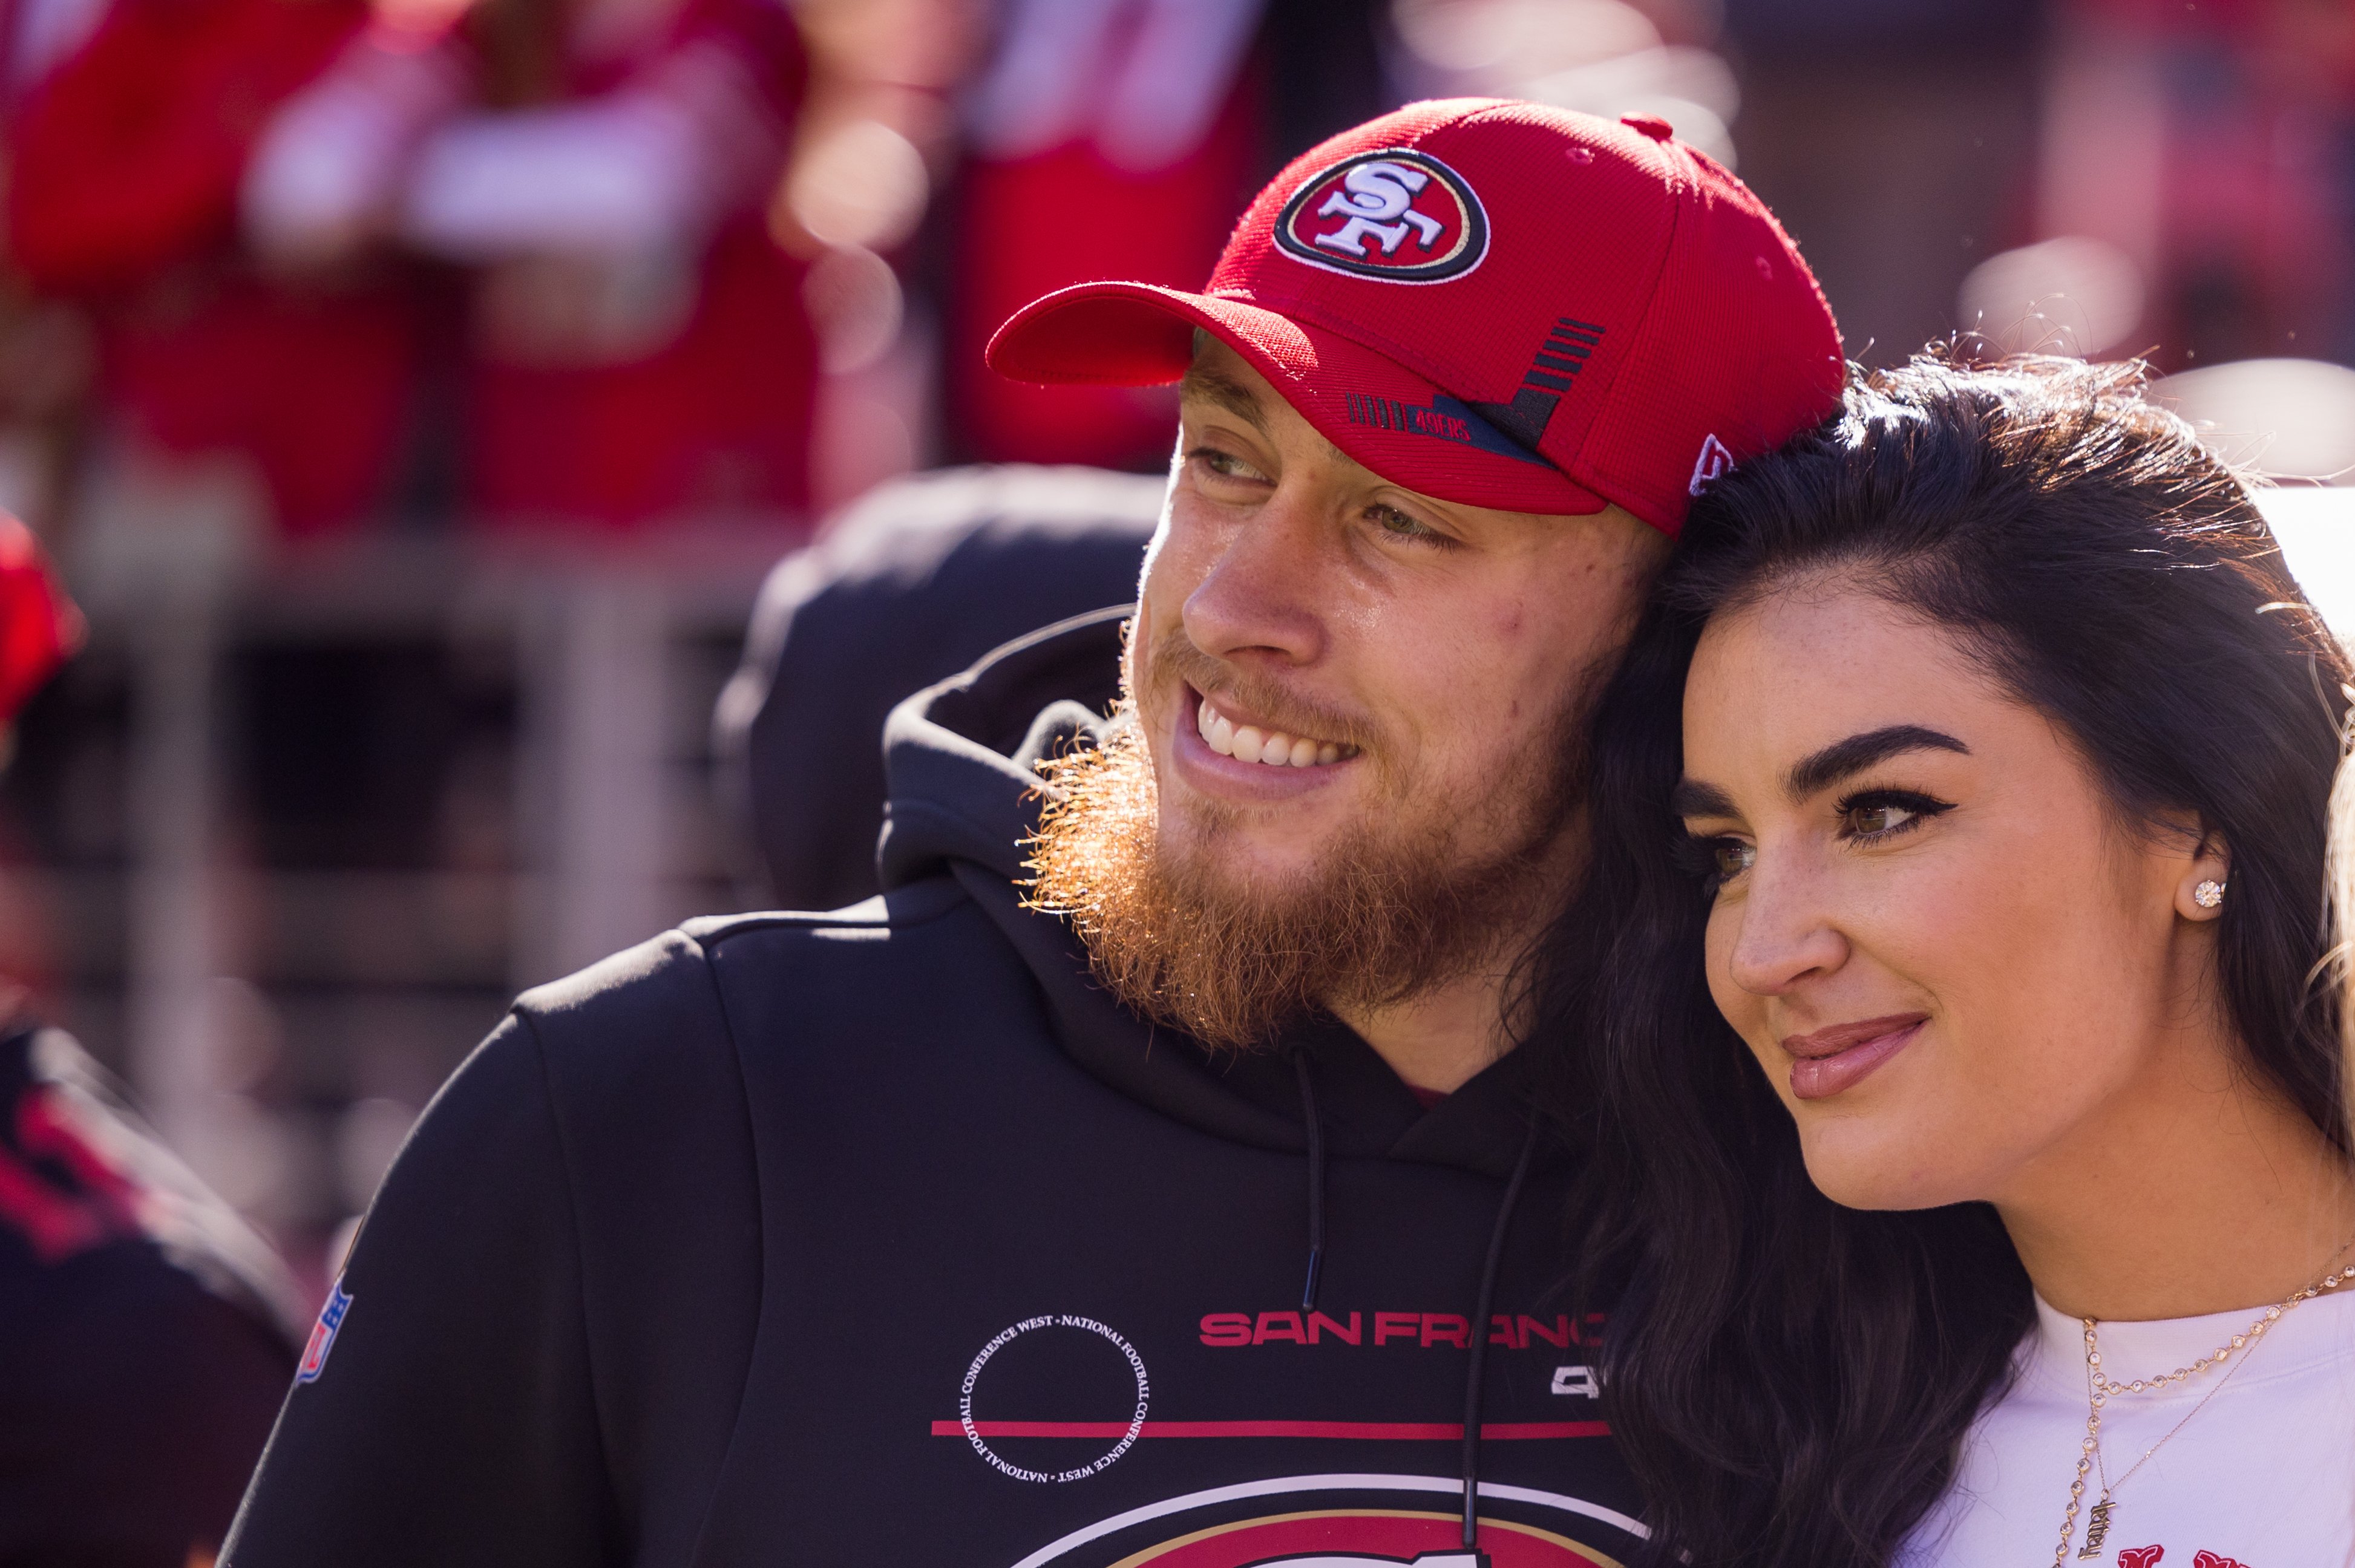 San Francisco 49ers Tight End George Kittle (85) poses with his wife, Claire, before the NFL pro football game between the Houston Texans and San Francisco 49ers on January 2, 2022 at Levis Stadium in Santa Clara, CA. | Source: Getty Images